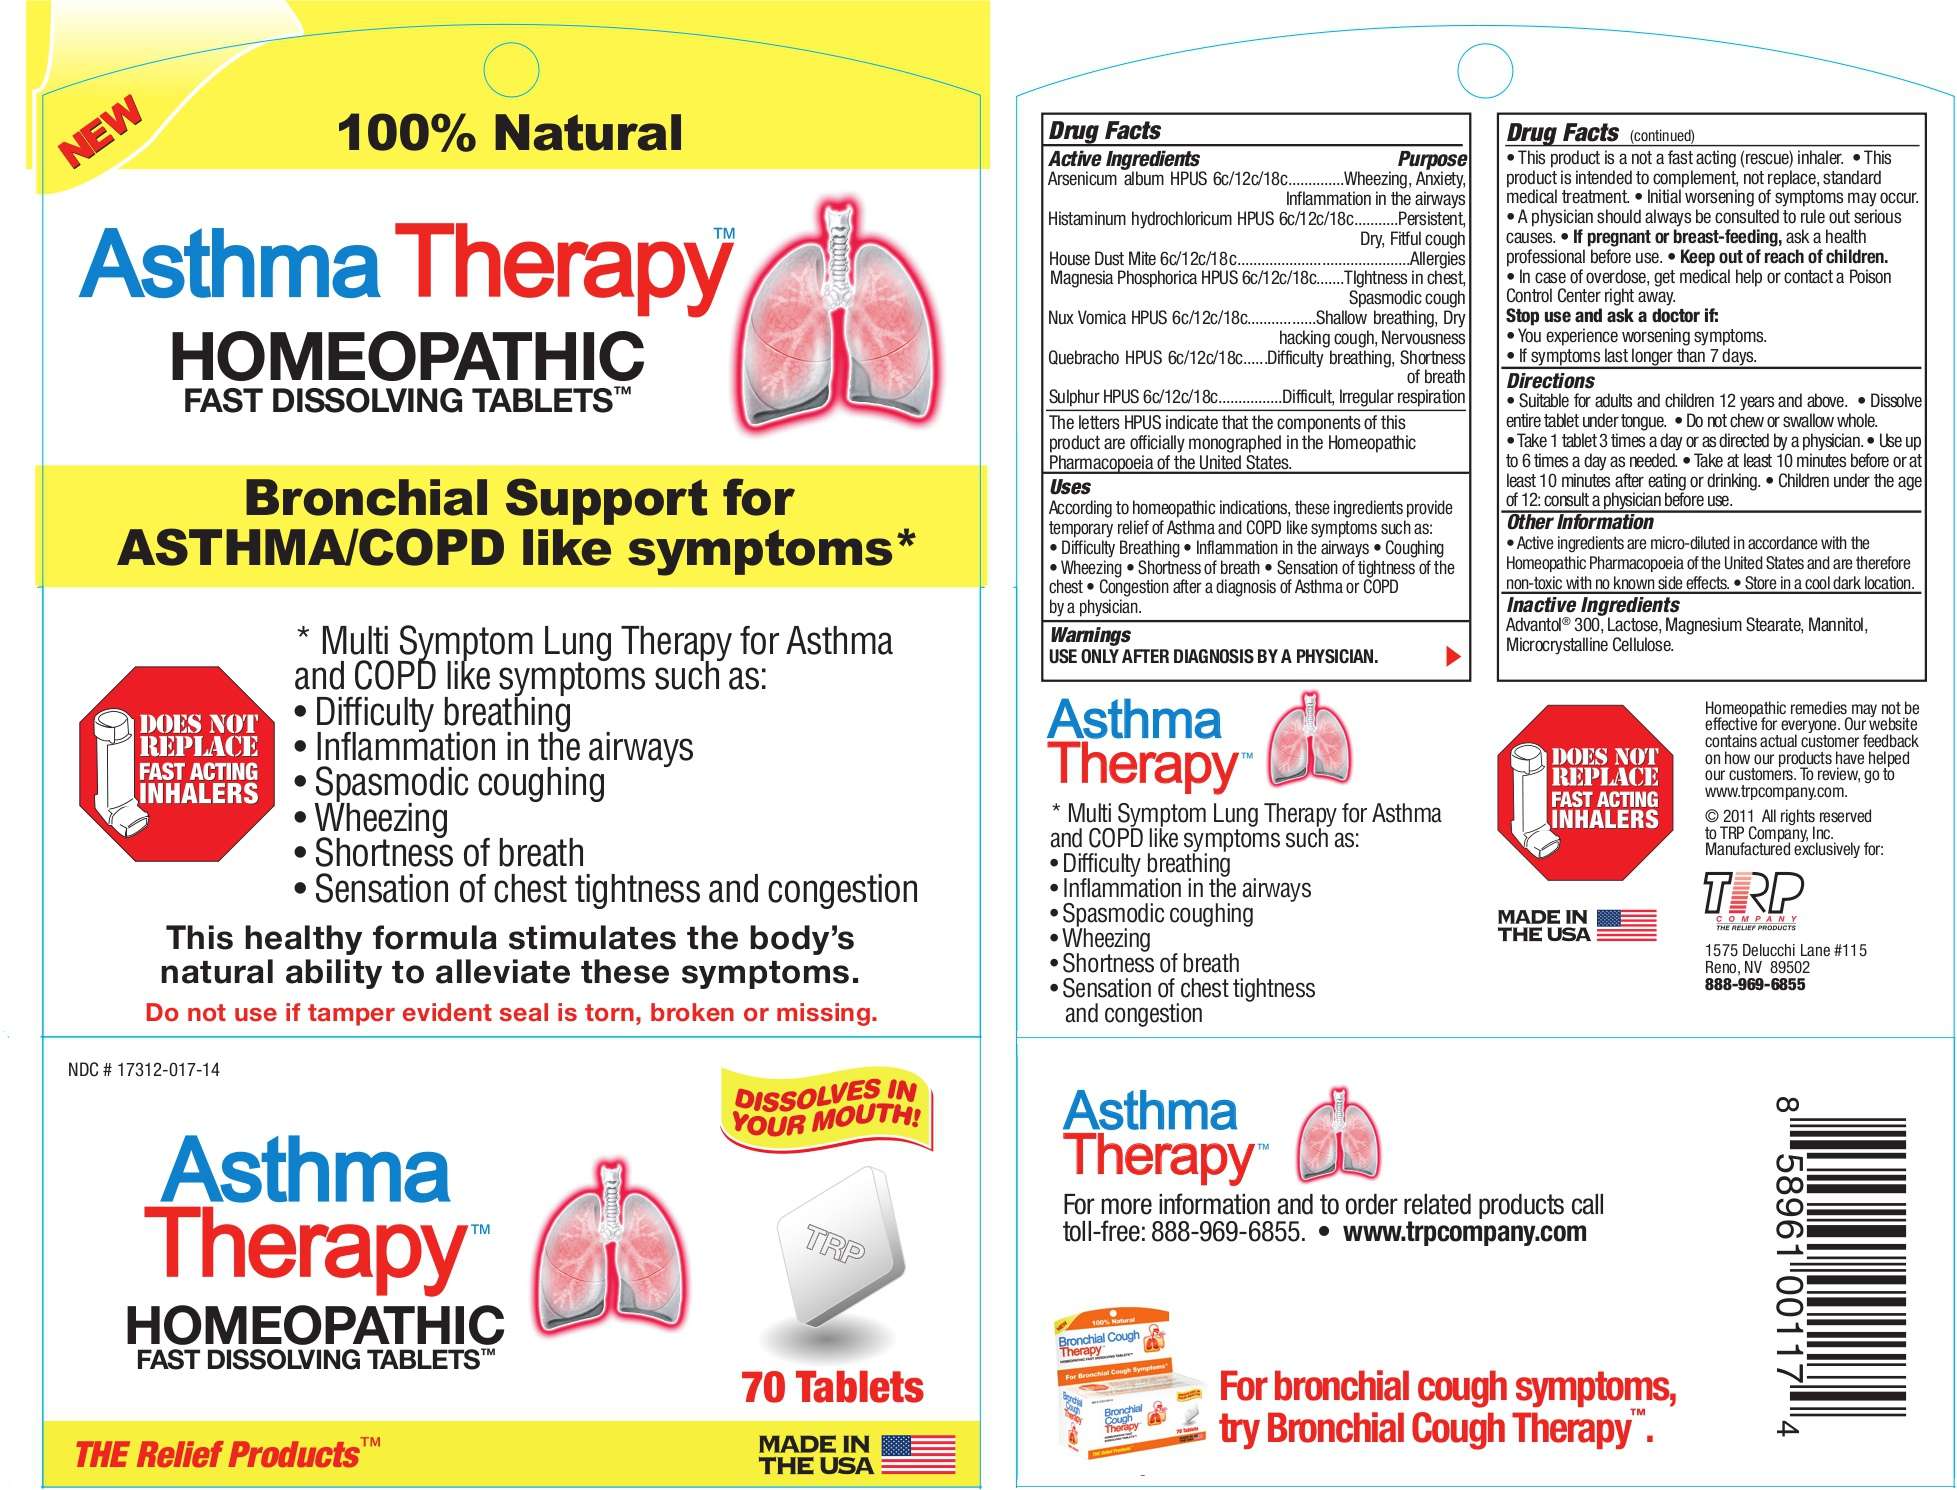 Asthma Therapy